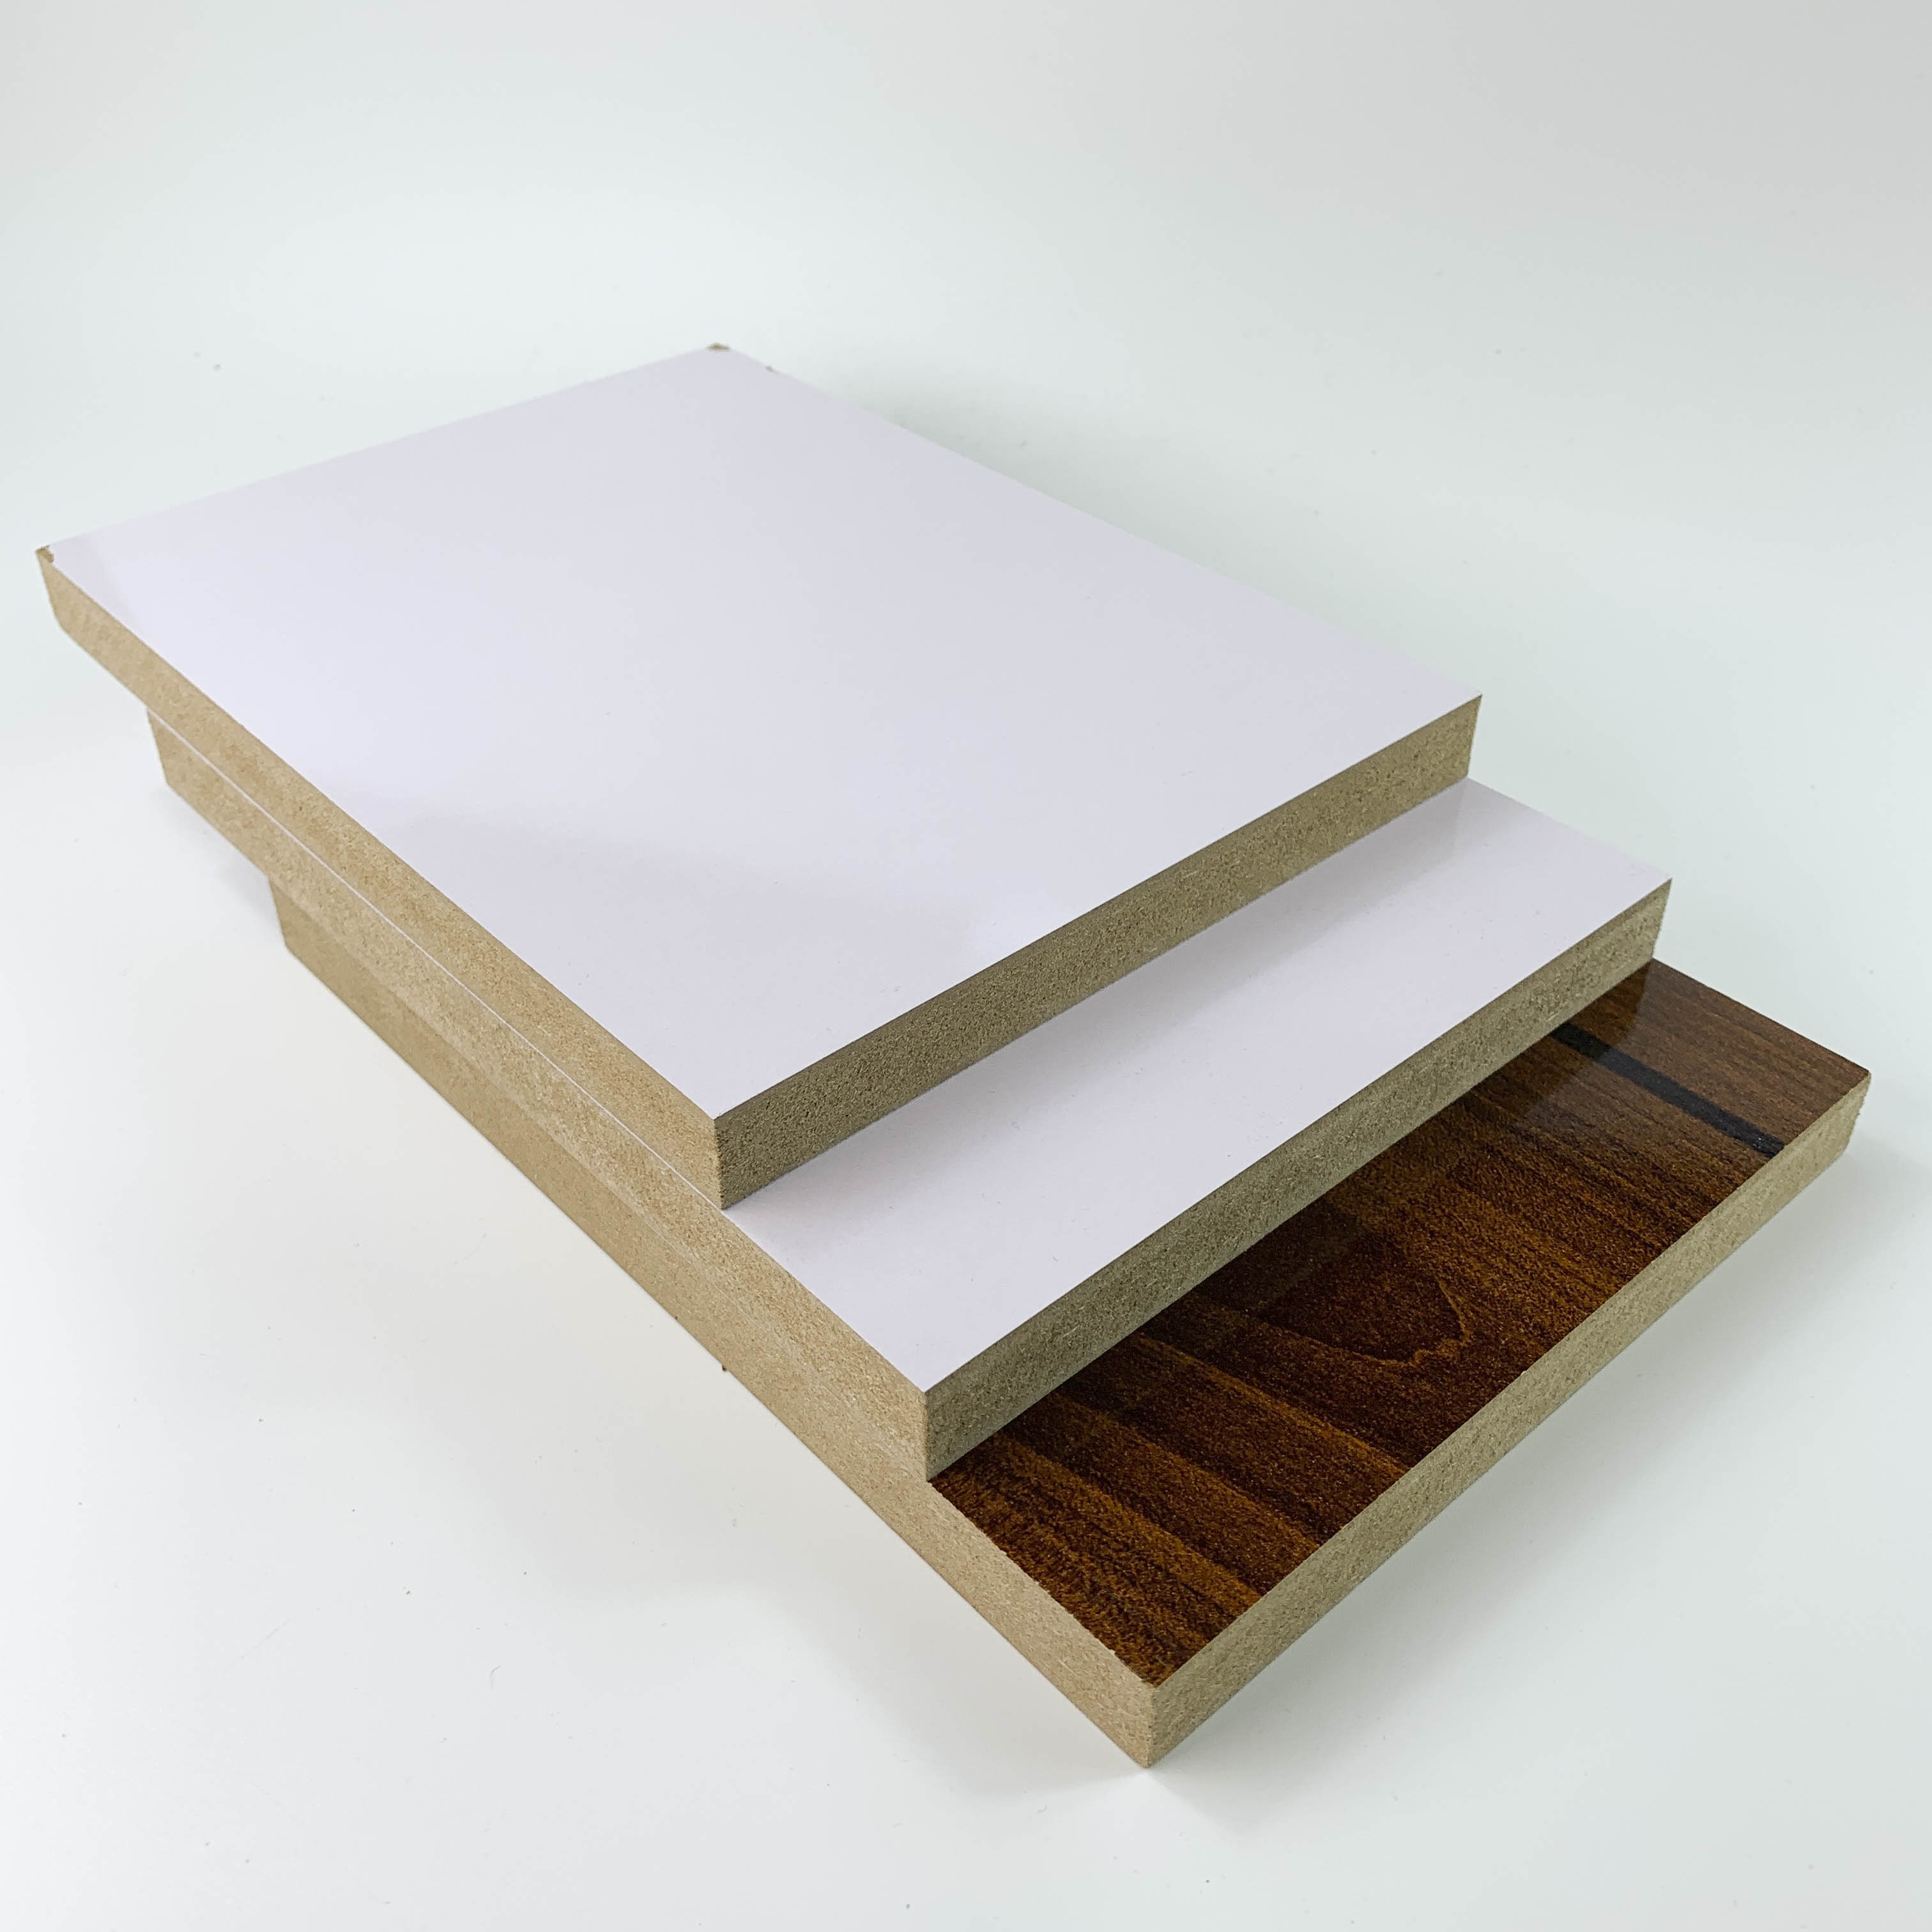 Learn More about the Medium-Density Fiberboard